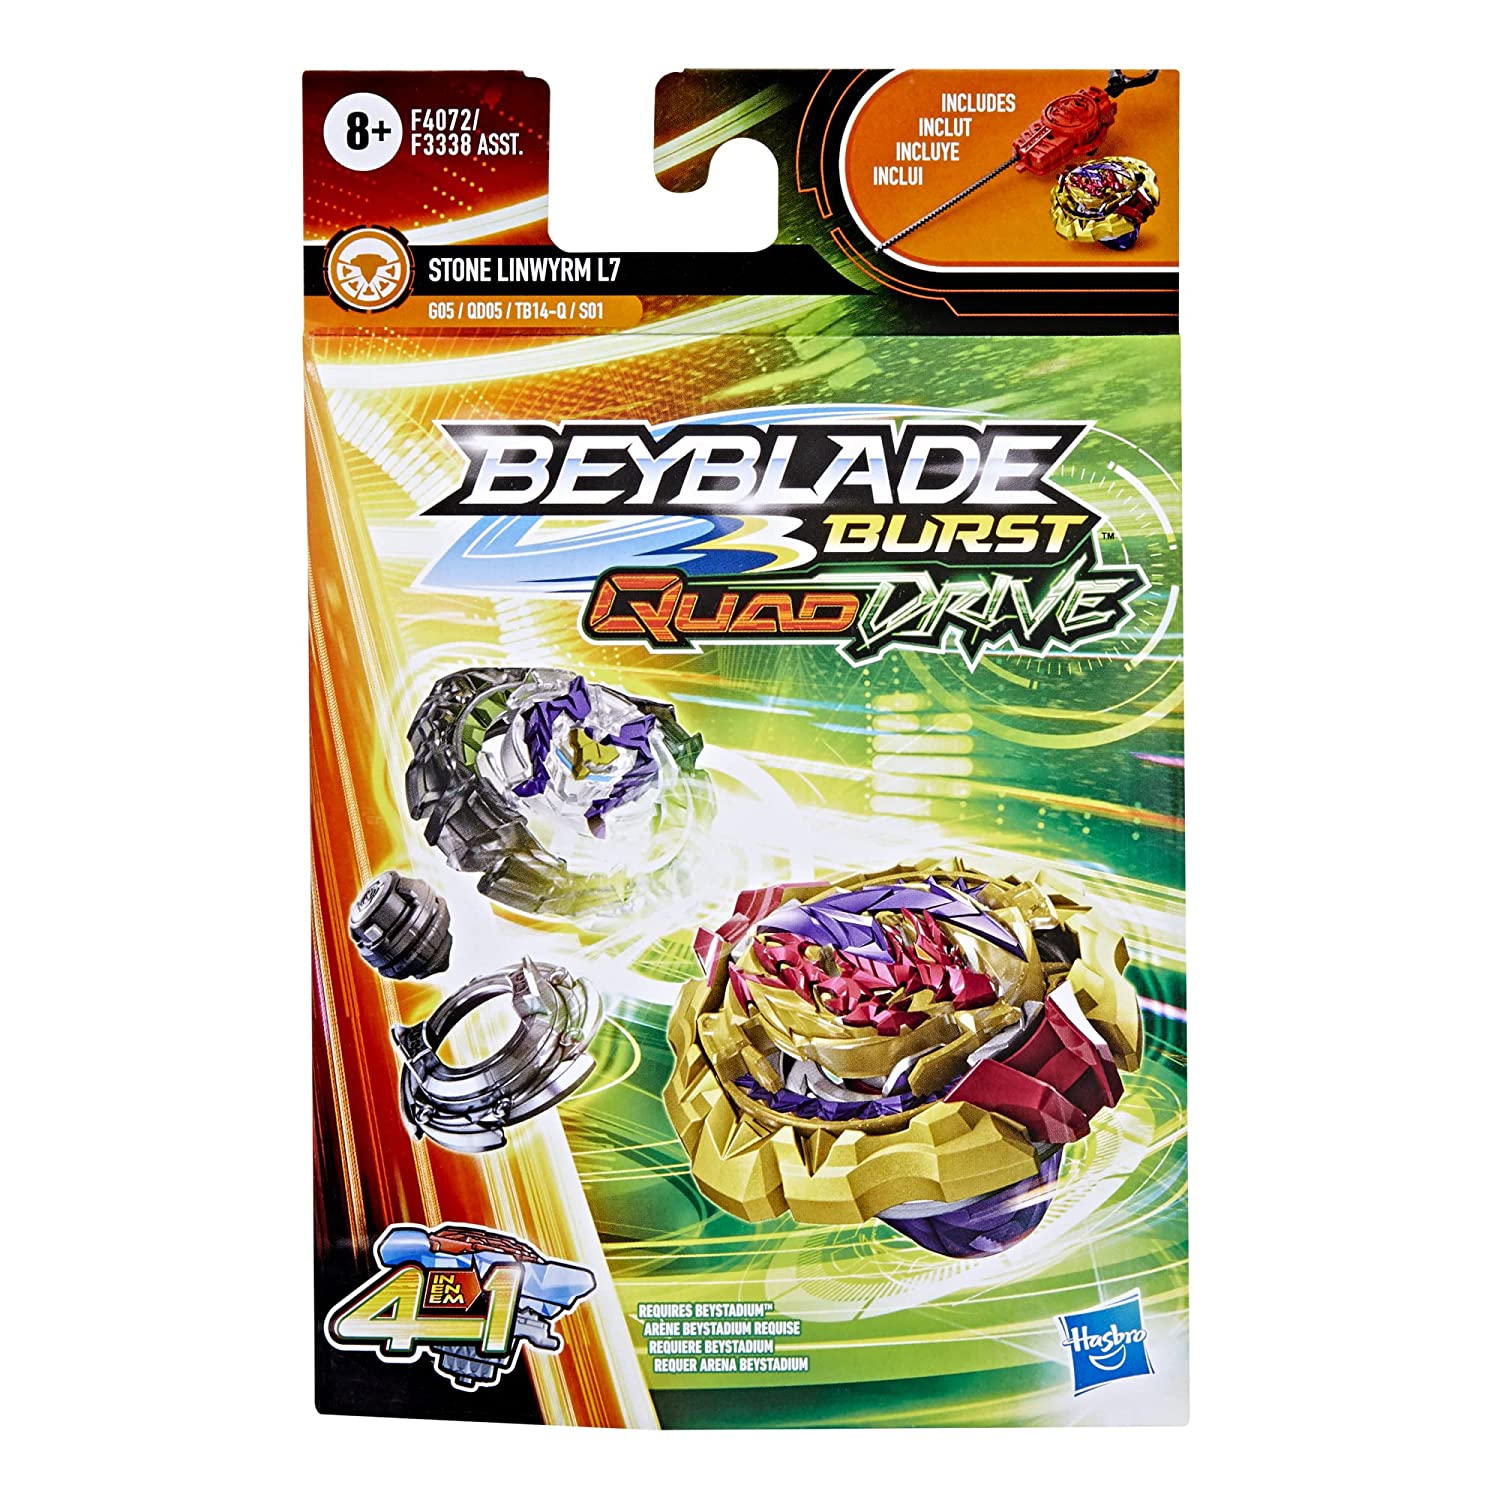 Beyblade Burst QuadDrive Stone Linwyrm L7 Spinning Top Starter Pack with Launcher for Kids Ages 8 and Up